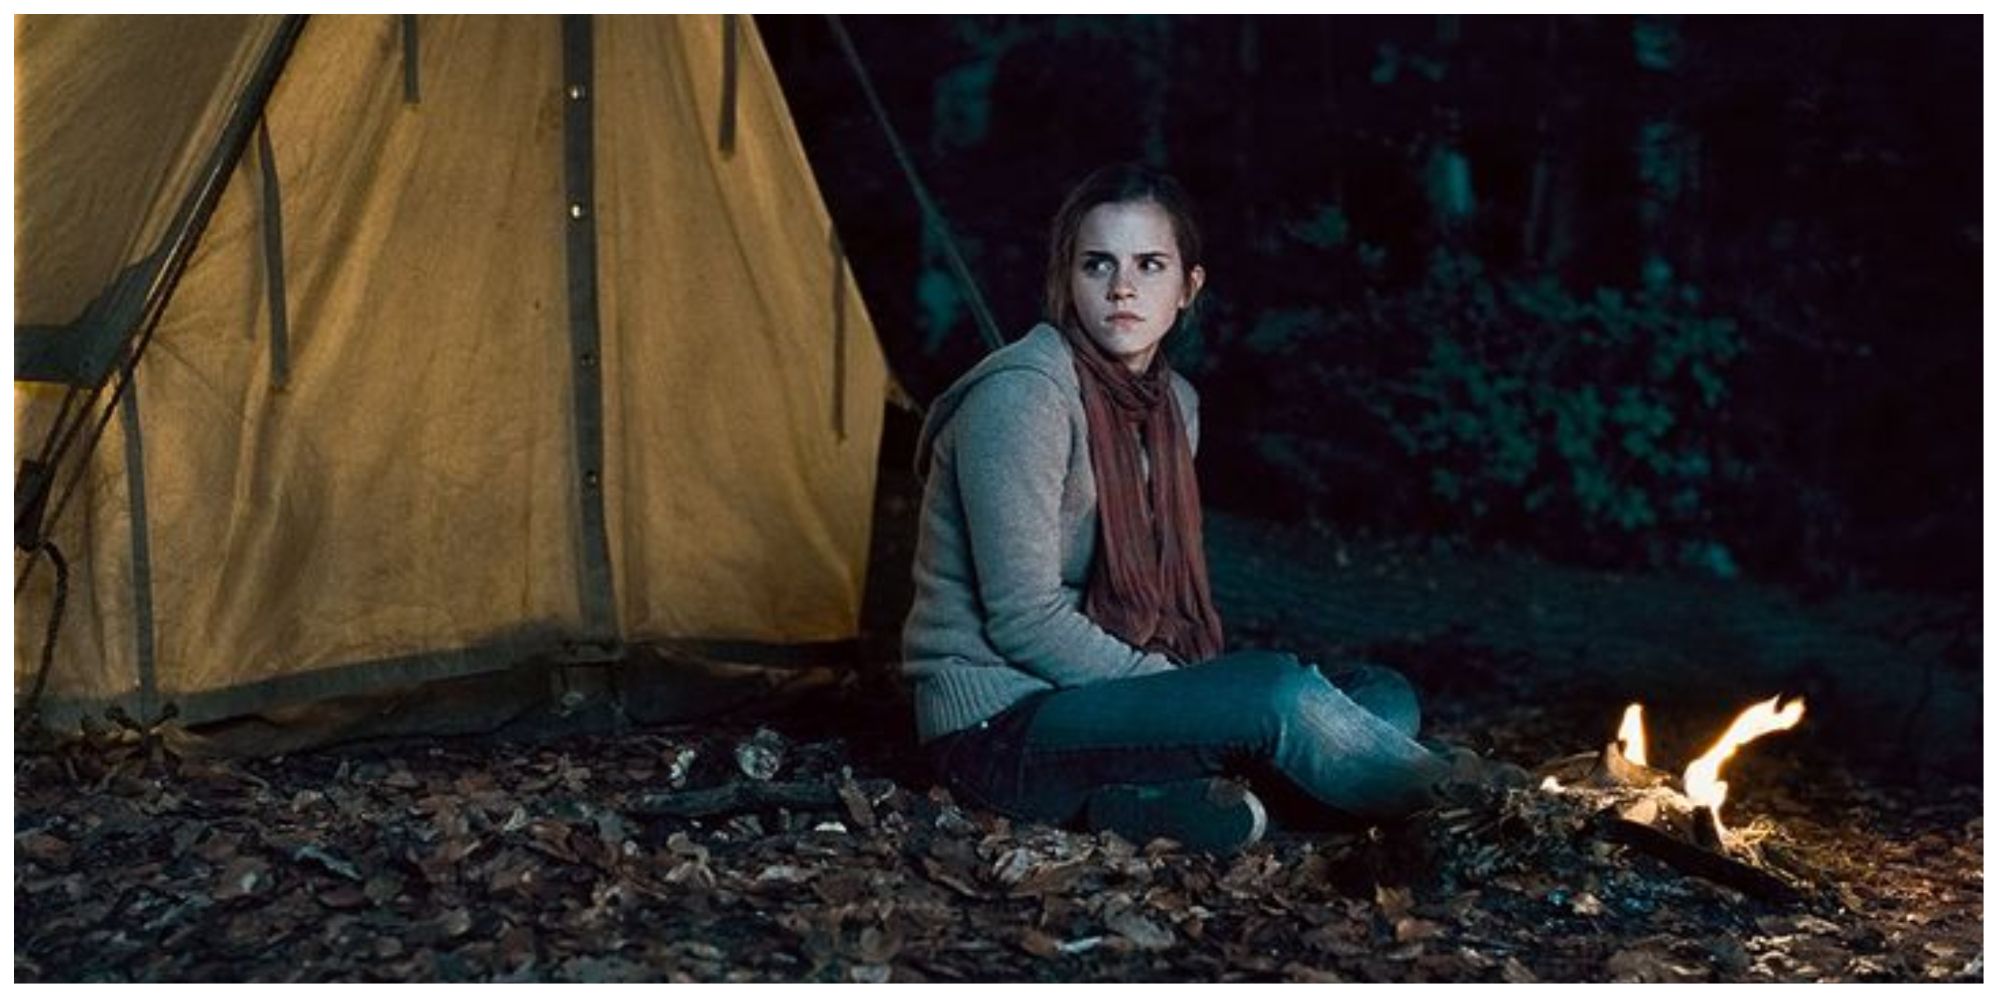 Emma Watson as Hermione Granger in Harry Potter and The Deathly Hallows 